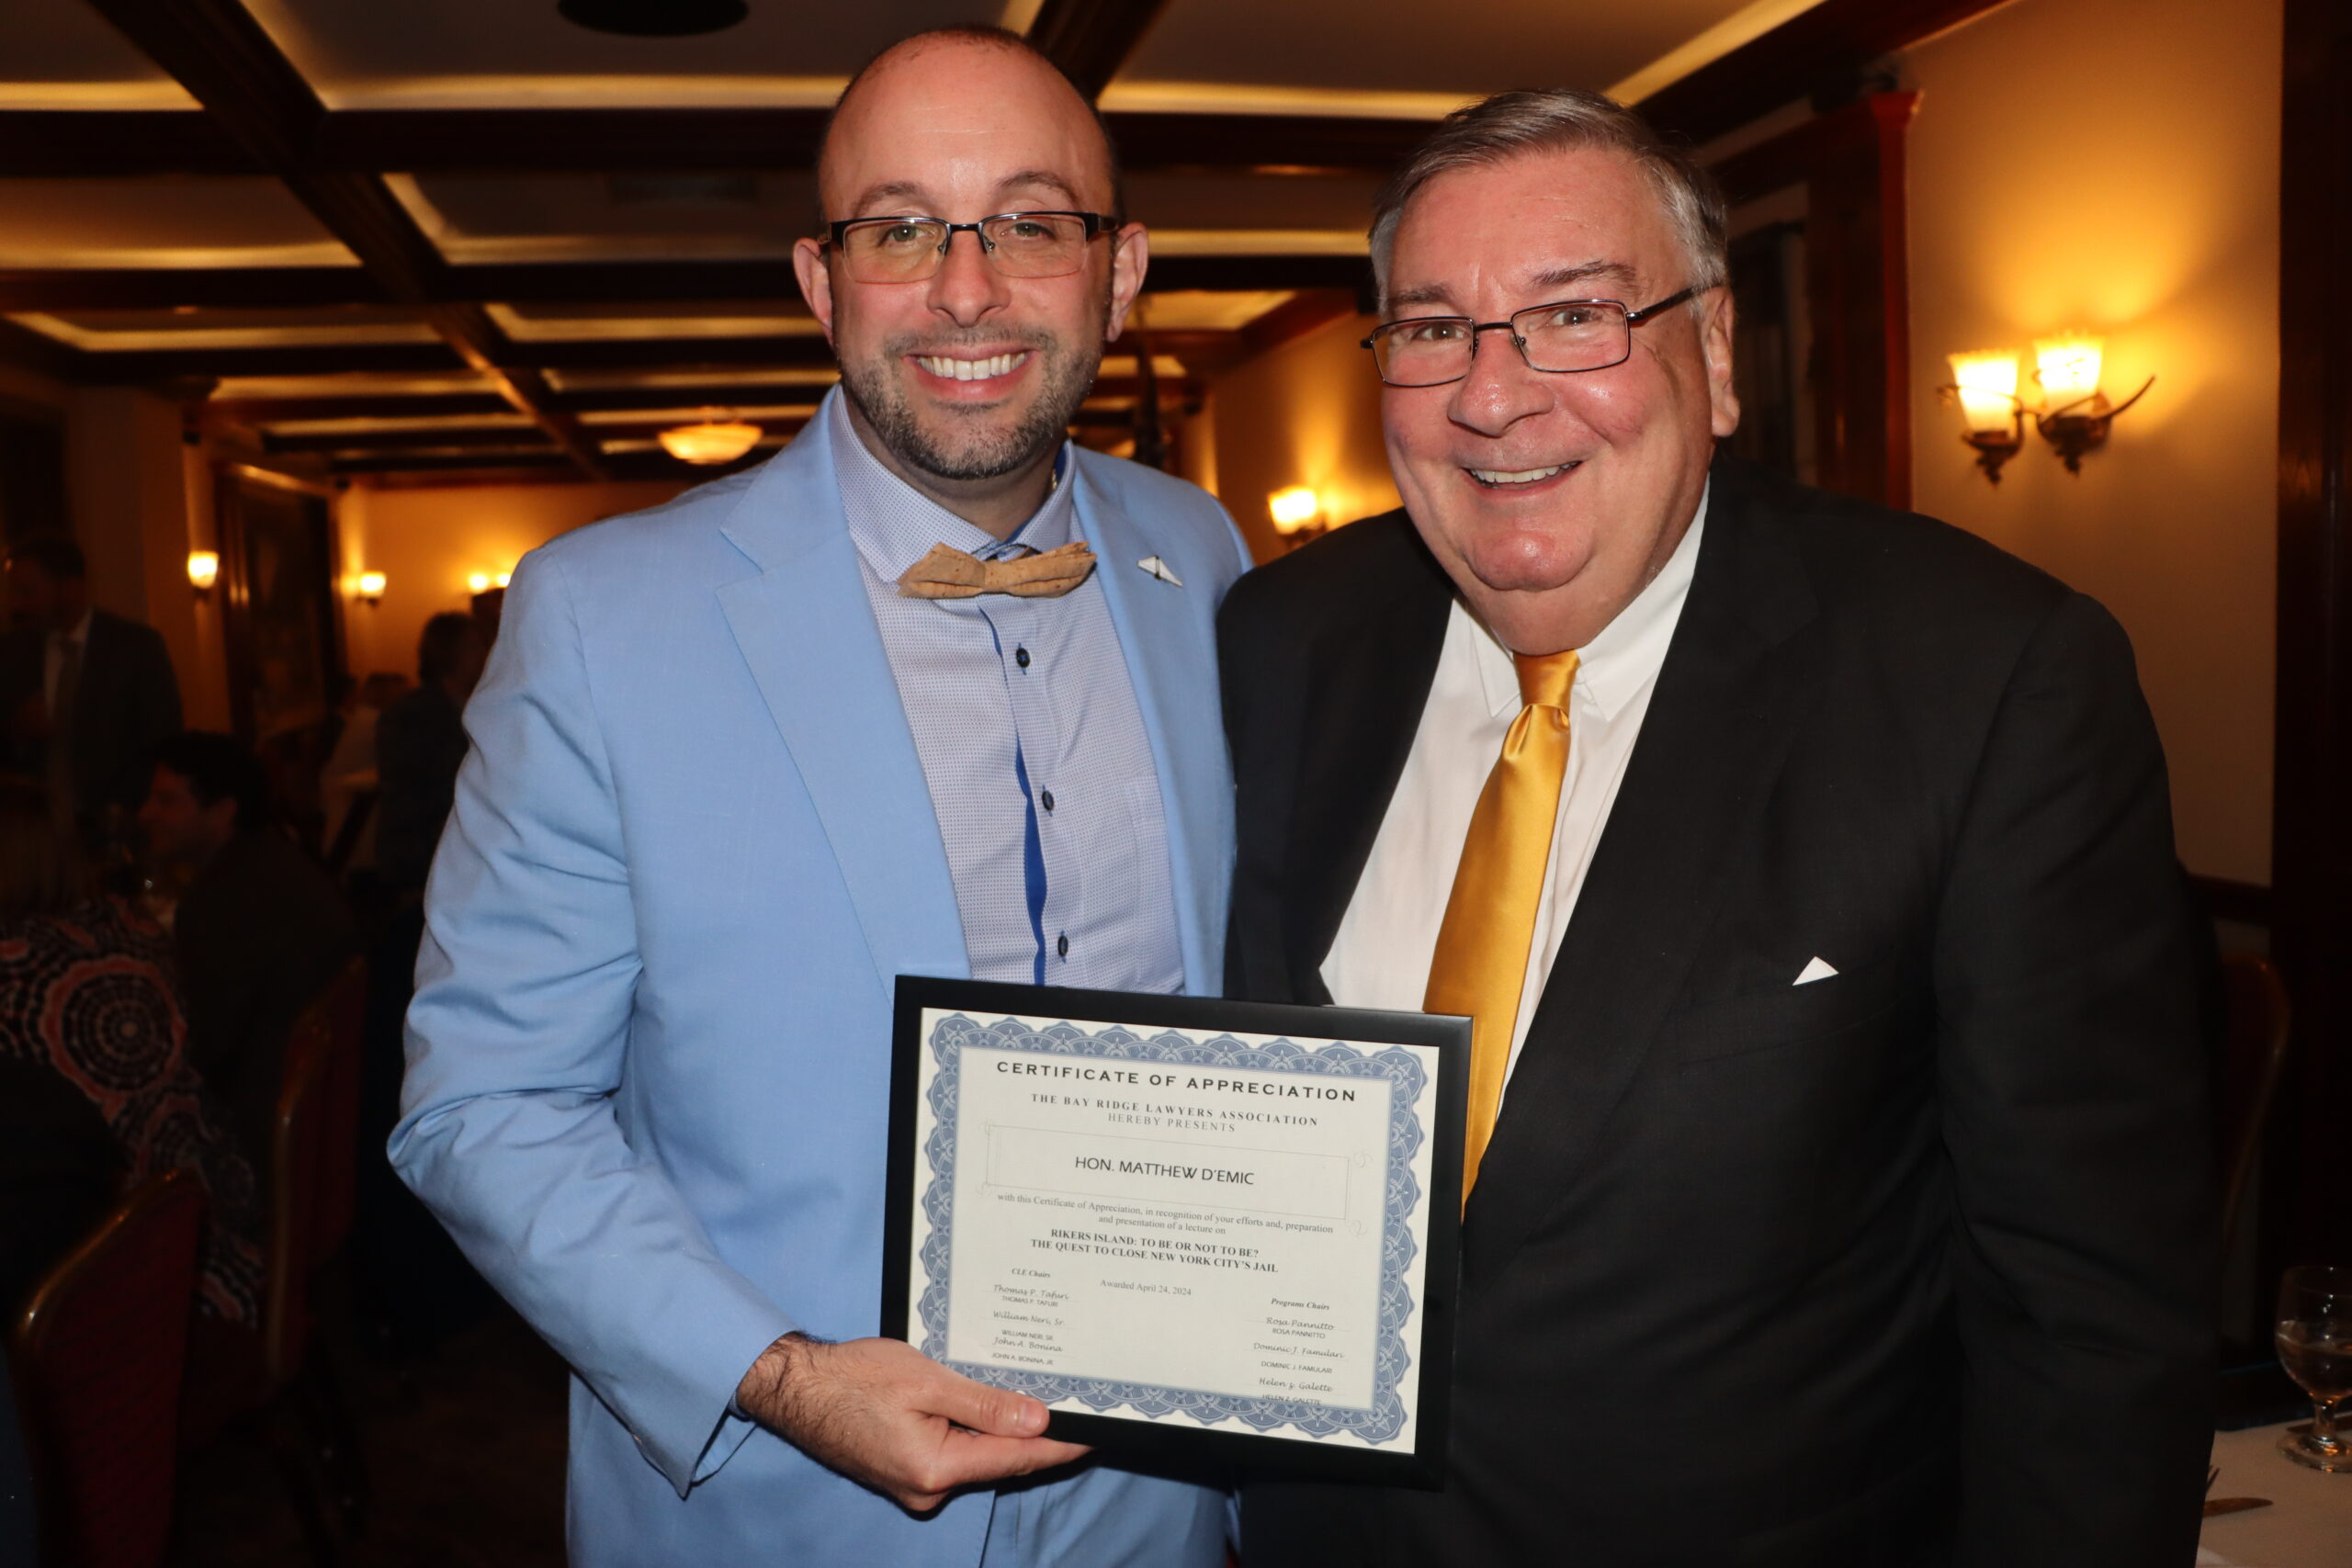 BRLA President Adam Kalish presents Hon. Matthew D'Emic with a certificate of appreciation for his insightful lecture on the future of Rikers Island at the Bay Ridge Lawyers Association meeting in Brooklyn. Brooklyn Eagle photos by Mario Belluomo